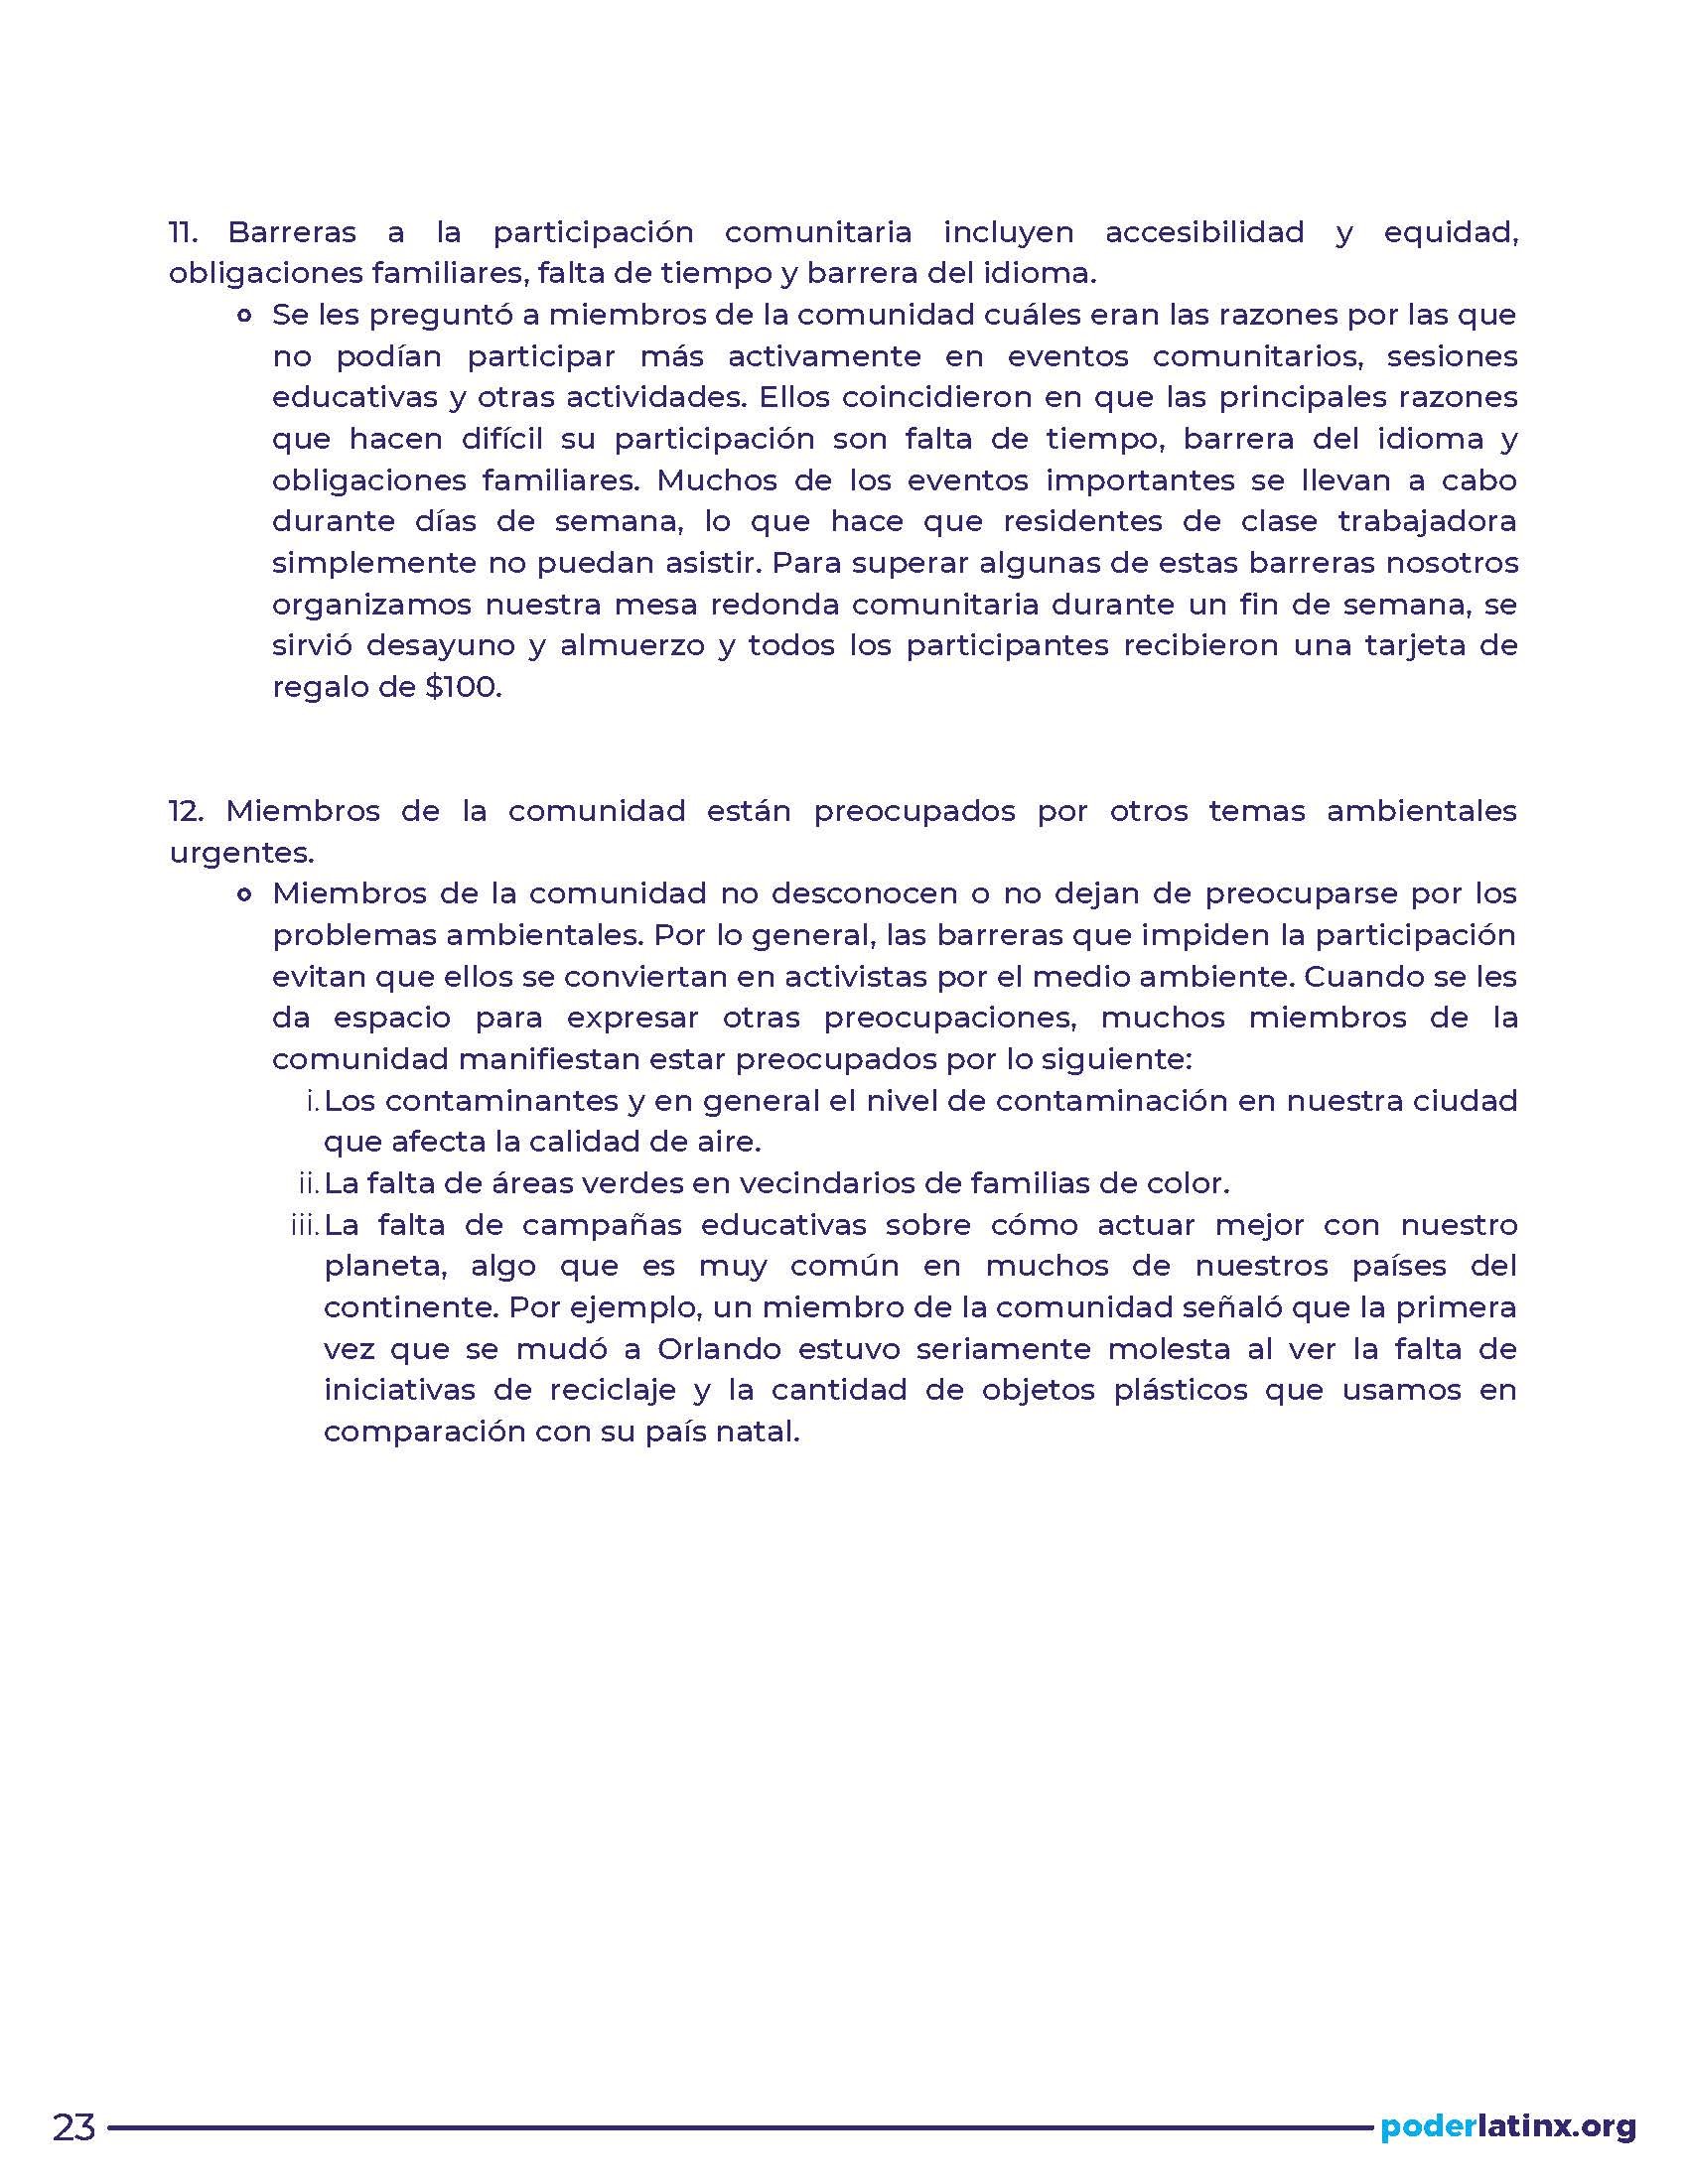 IMT Report - Spanish_Page_23.jpg